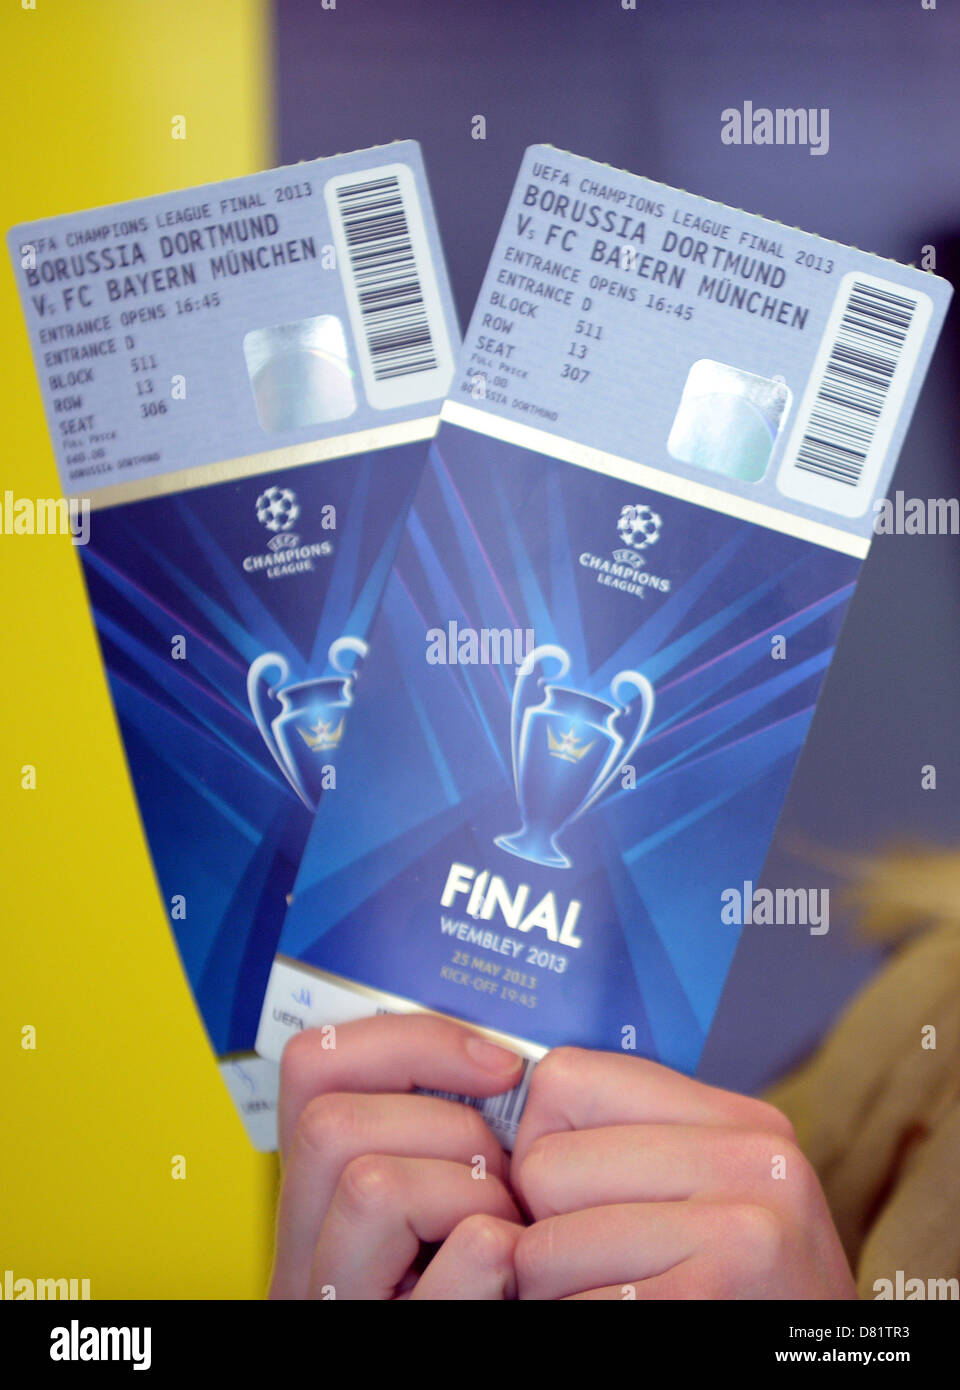 A young woman presents tickets for the final Champions League match in  Dortmund, Germany, 15 May 2013. Borussia Dortmund faces FC Bayern Munich  for the final match of the Champions League at